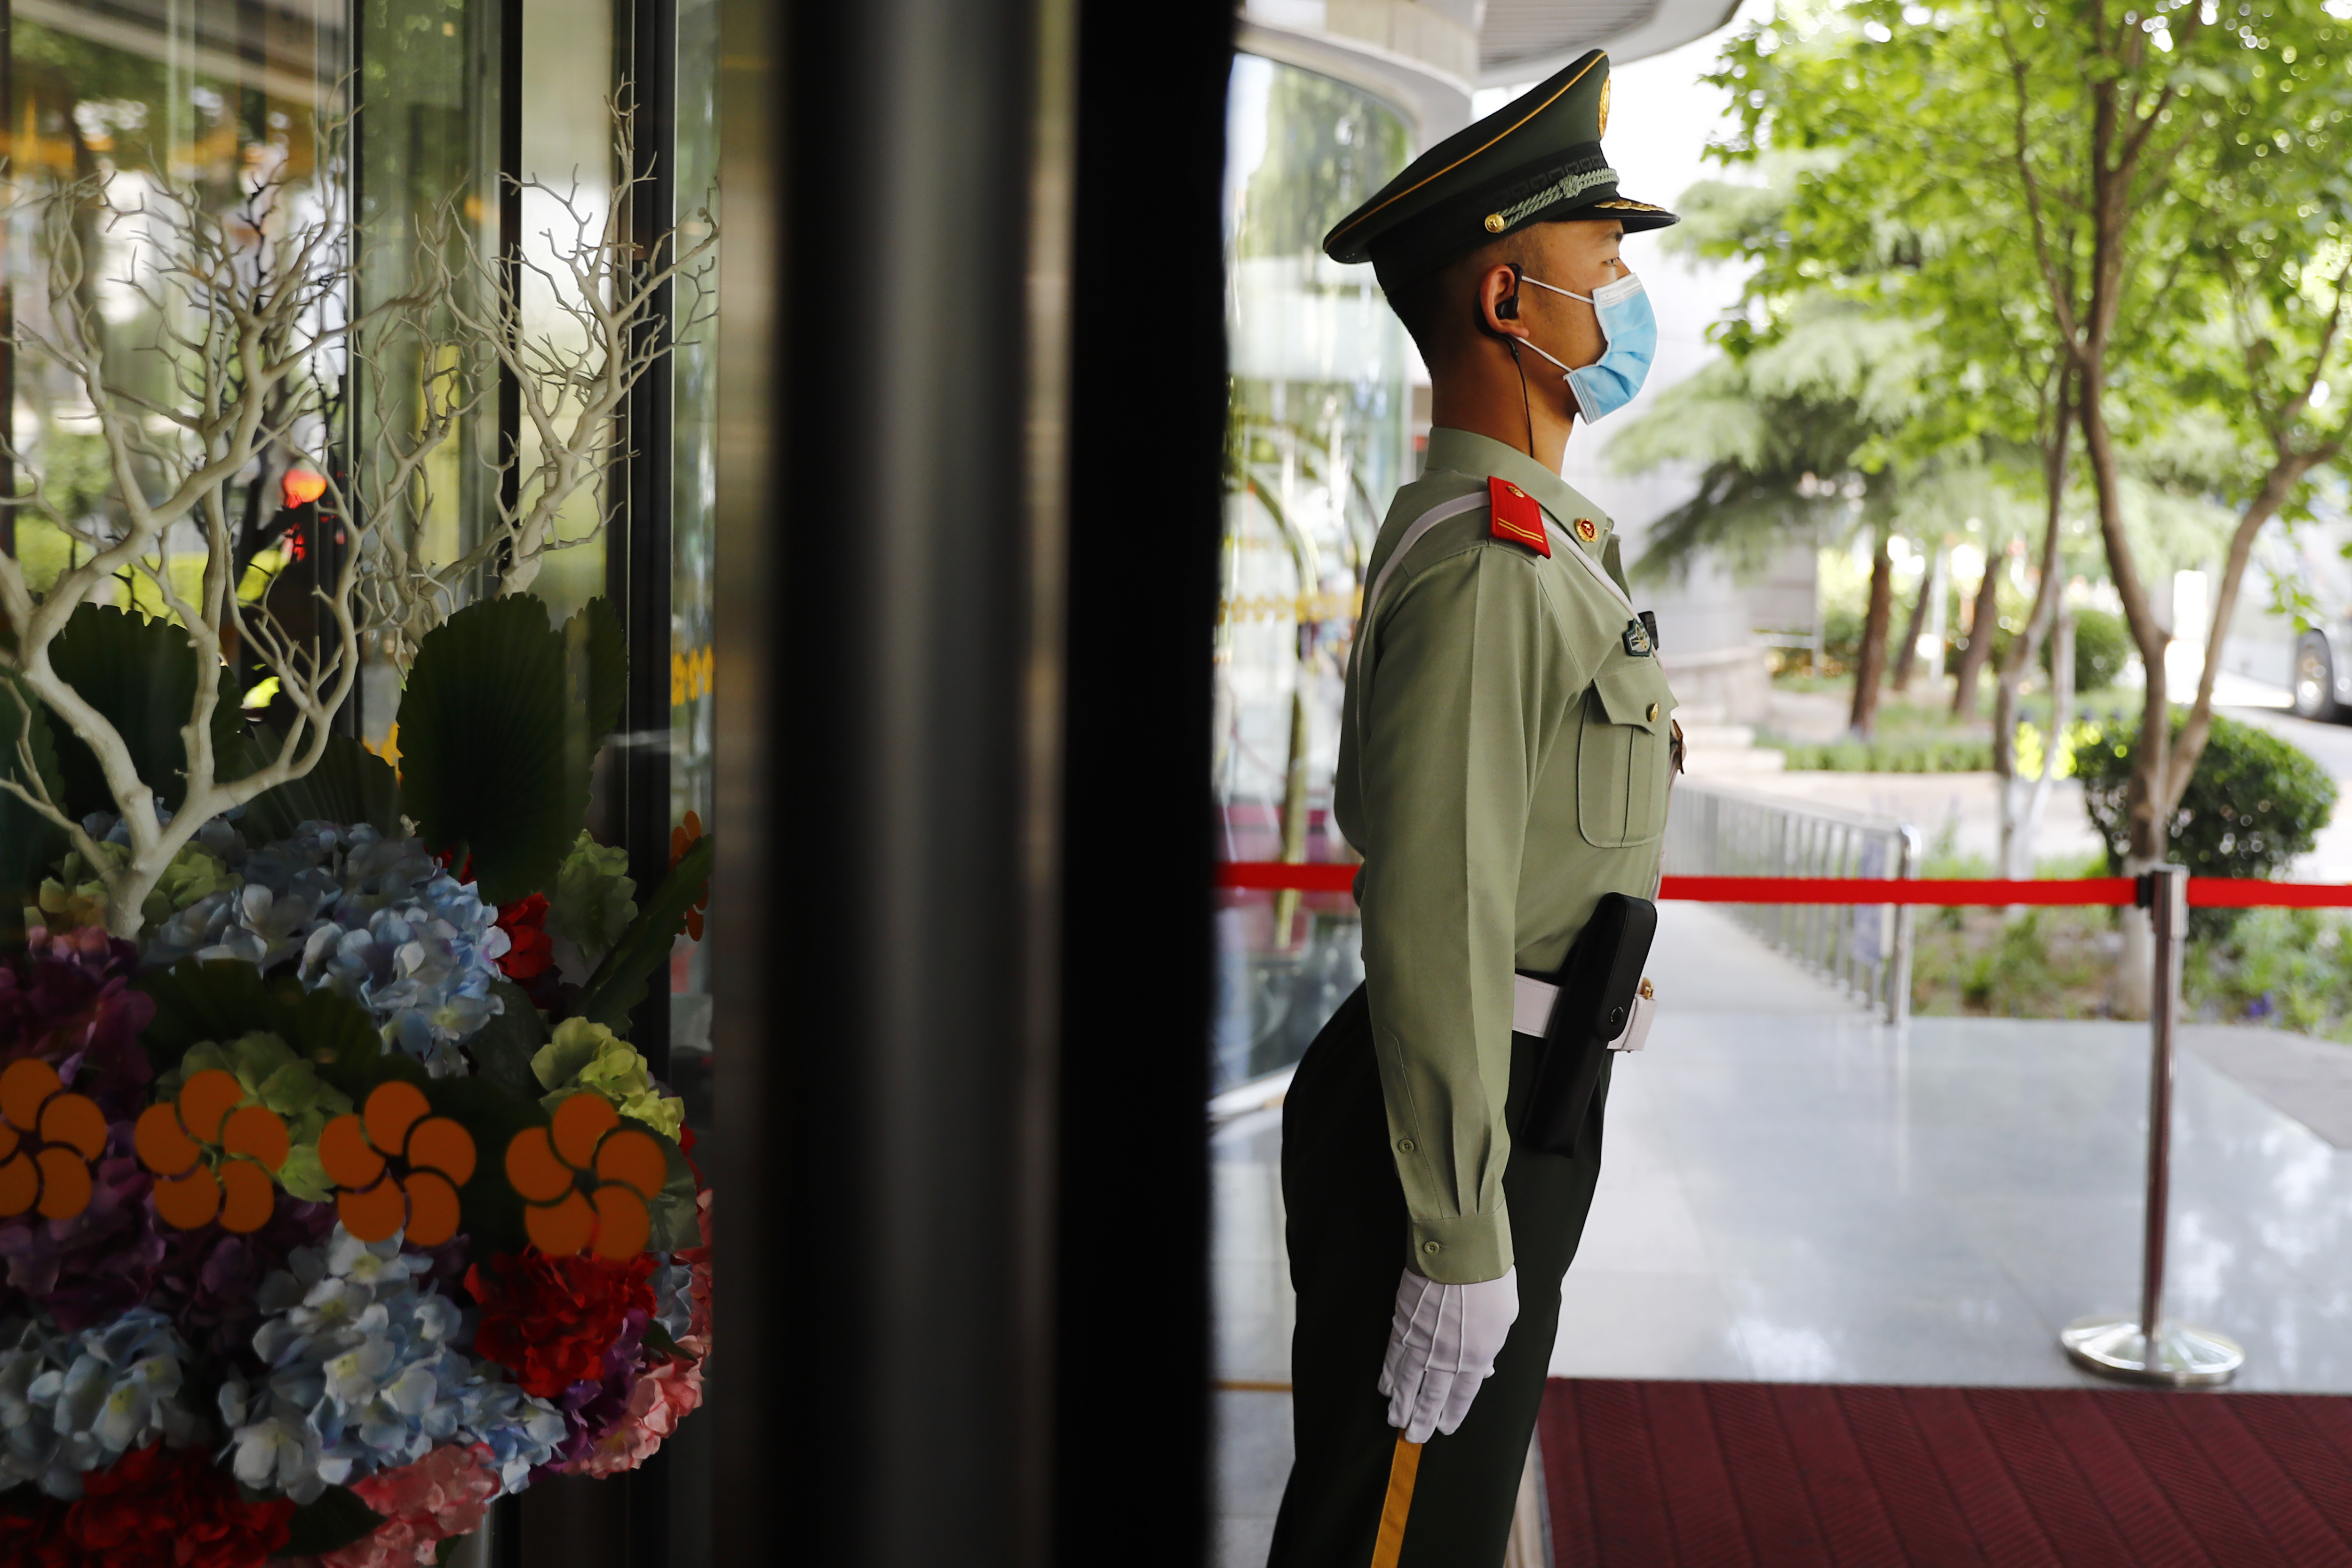 A paramilitary police officer wearing a face mask to protect against the coronavirus outbreak stands guard outside the media center before a news conference by Guo Weimin, spokesman for the National Committee of the Chinese People's Political Consultative Conference (CPPCC), in Beijing, Wednesday, May 20, 2020. (Thomas Peter/Pool Photo via AP)